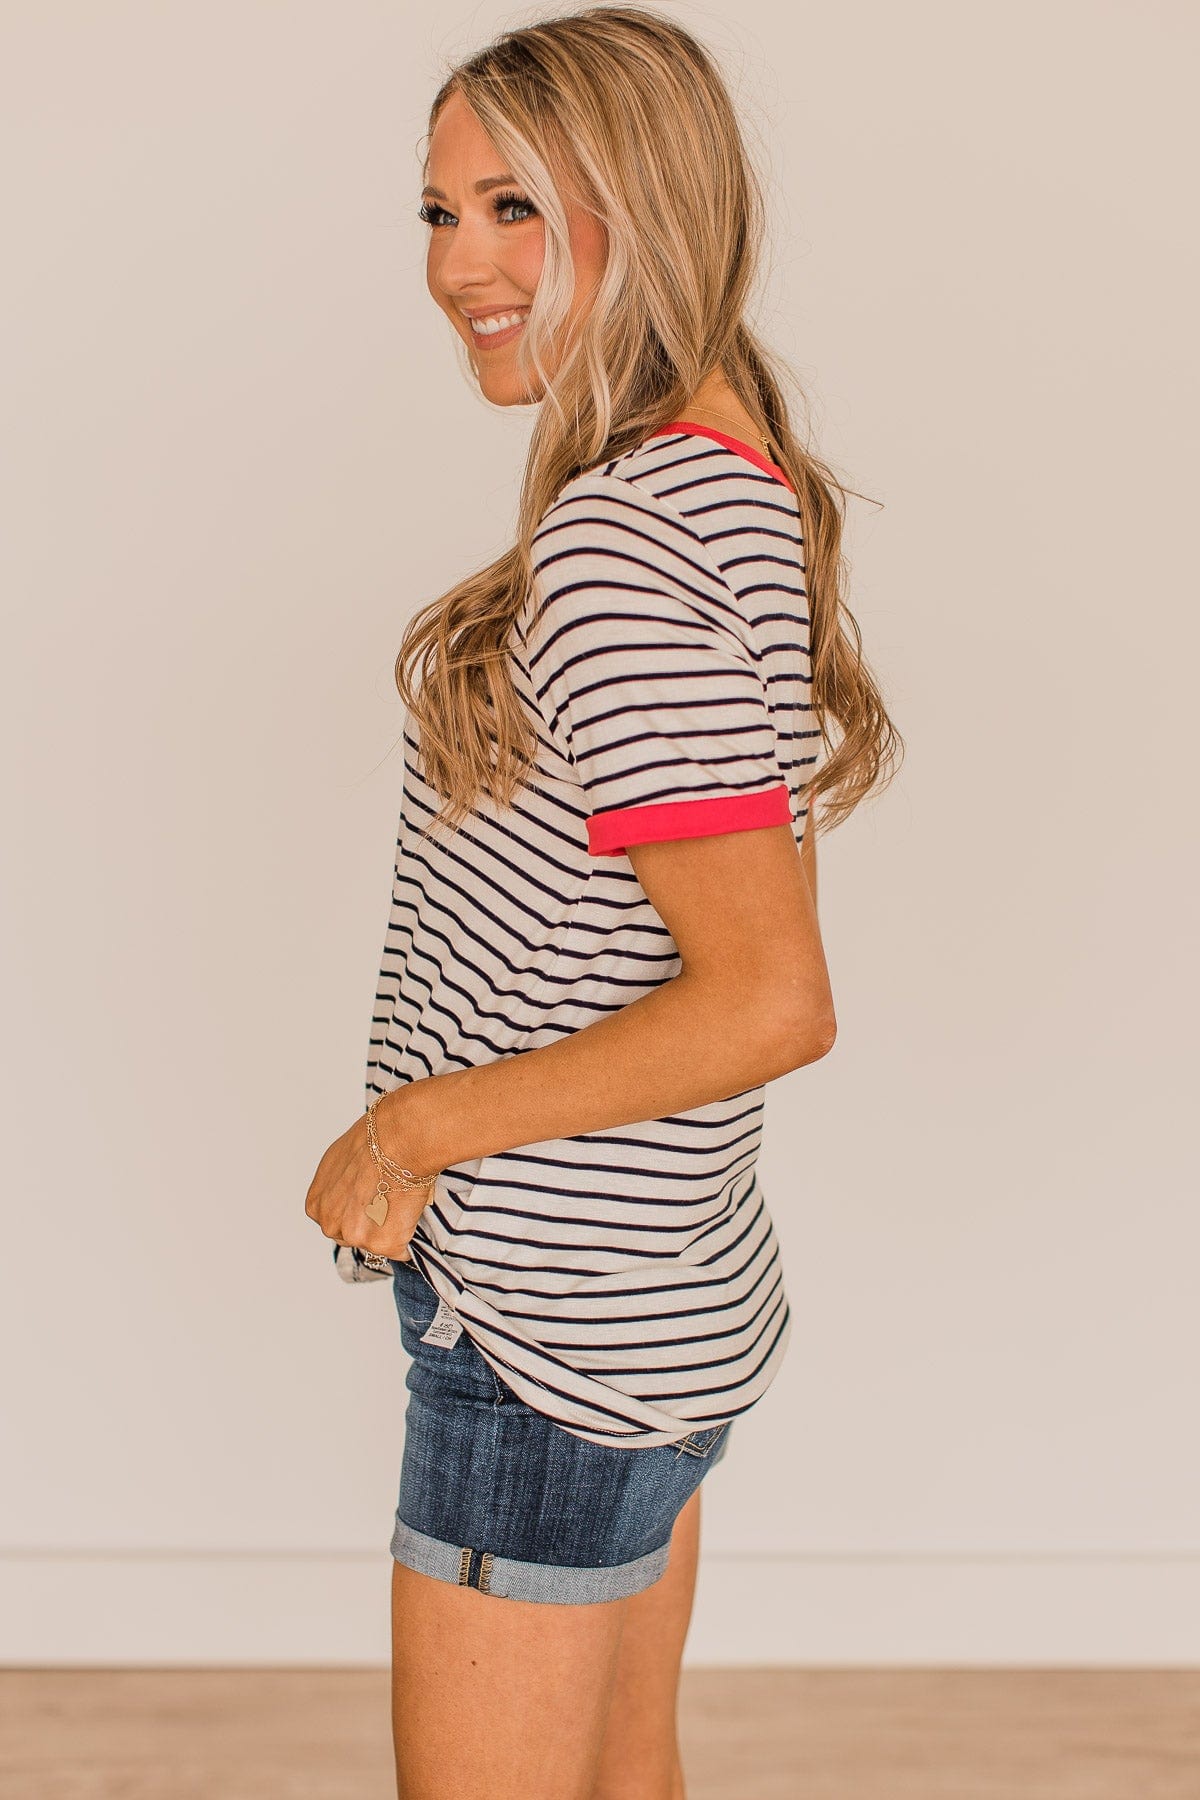 Something To Remember Striped Top- Ivory & Coral